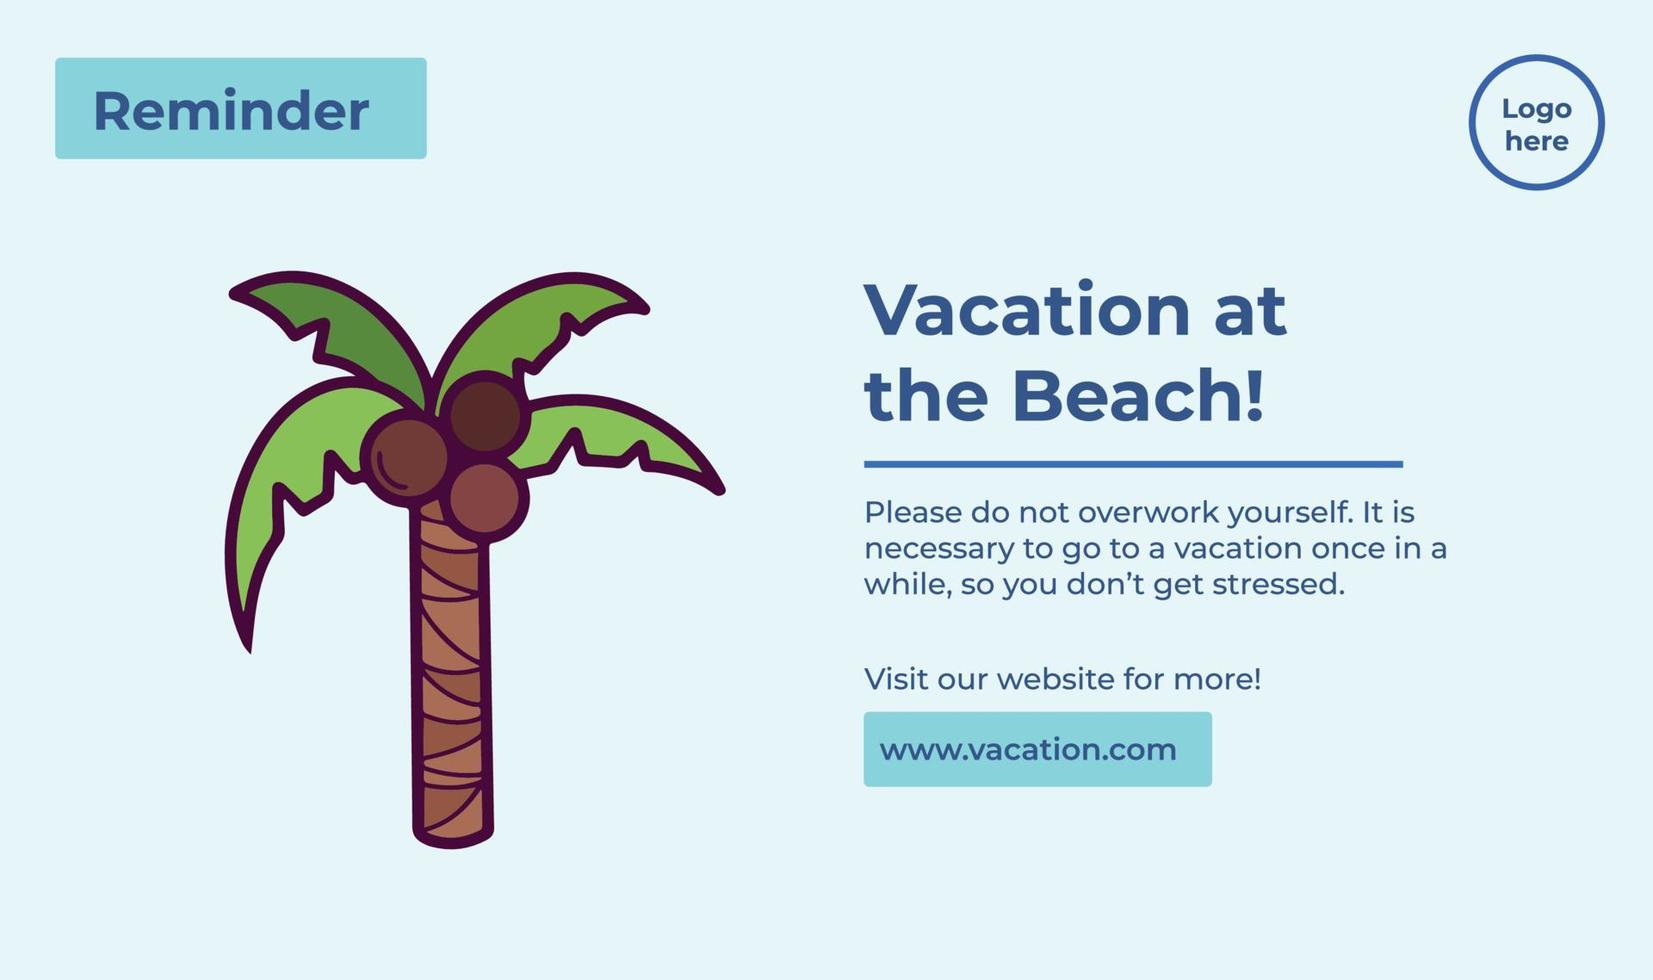 Vacation at the beach with coconut palm tree vector illustration decoration with descriptive texts isolated on rectangle landscape template. Design for social media post, banner, web poster, prints.